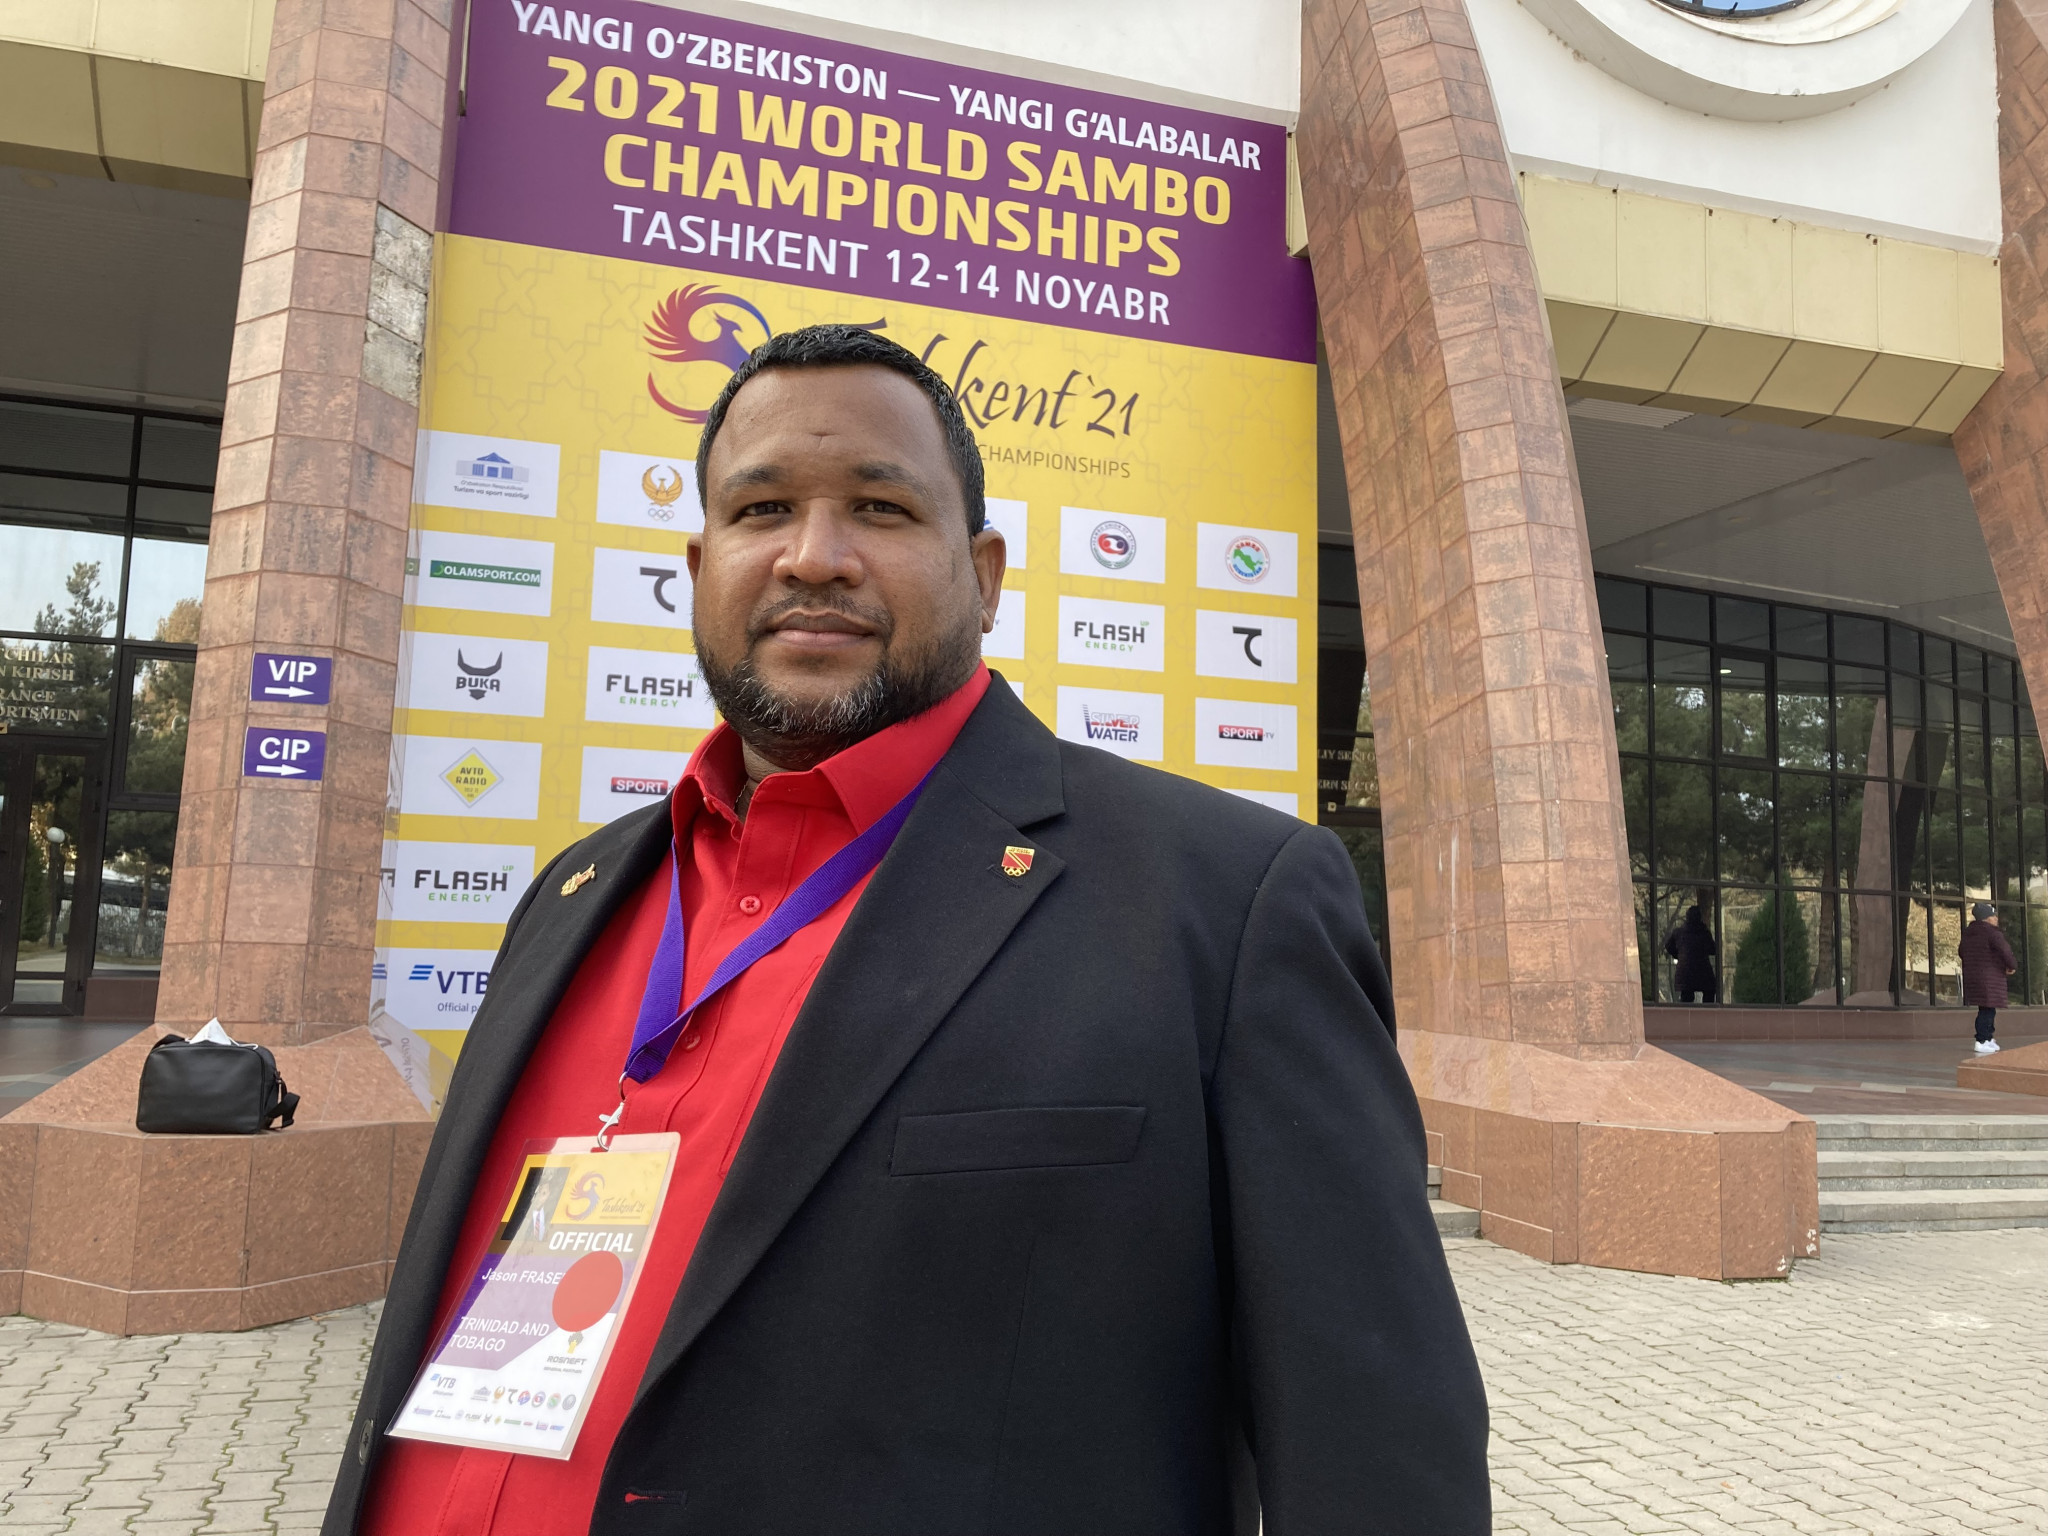 Caribbean needs top sambo coach to develop, insists Fraser after historic medal